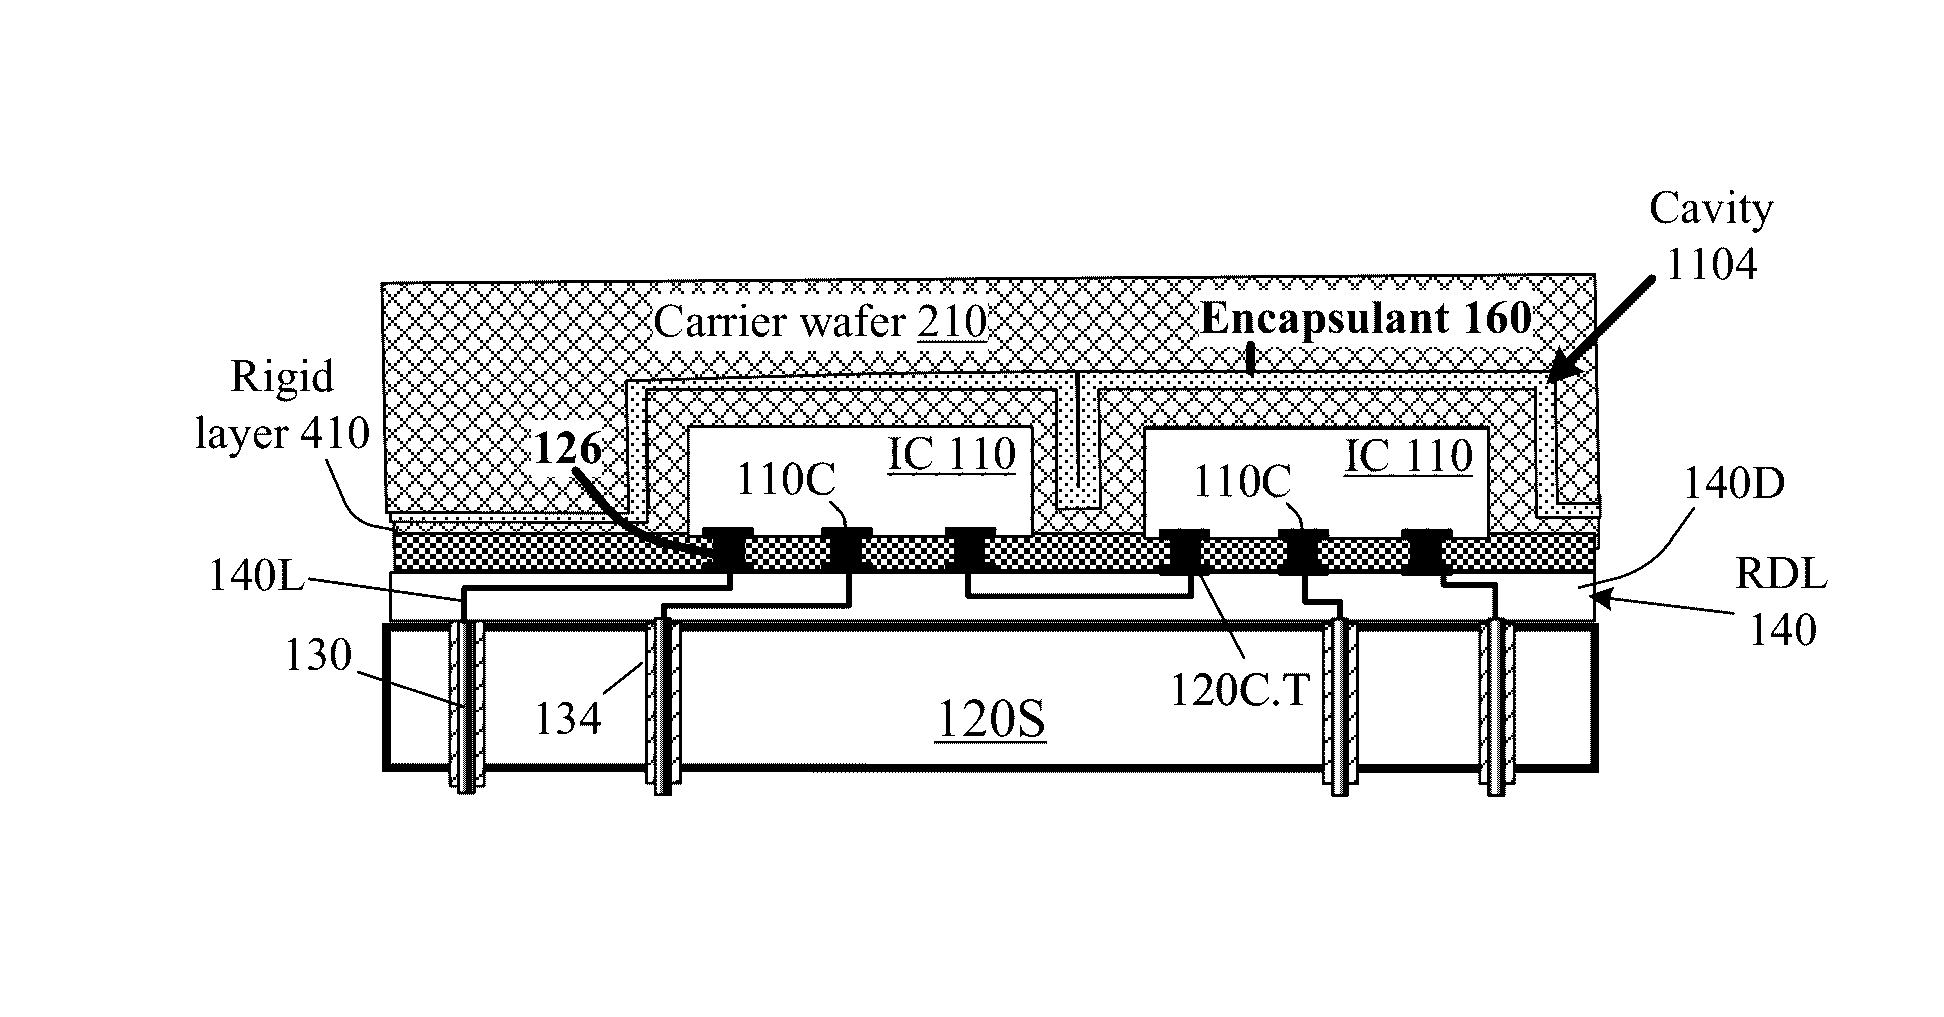 Integrated circuit assemblies with rigid layers used for protection against mechanical thinning and for other purposes, and methods of fabricating such assemblies